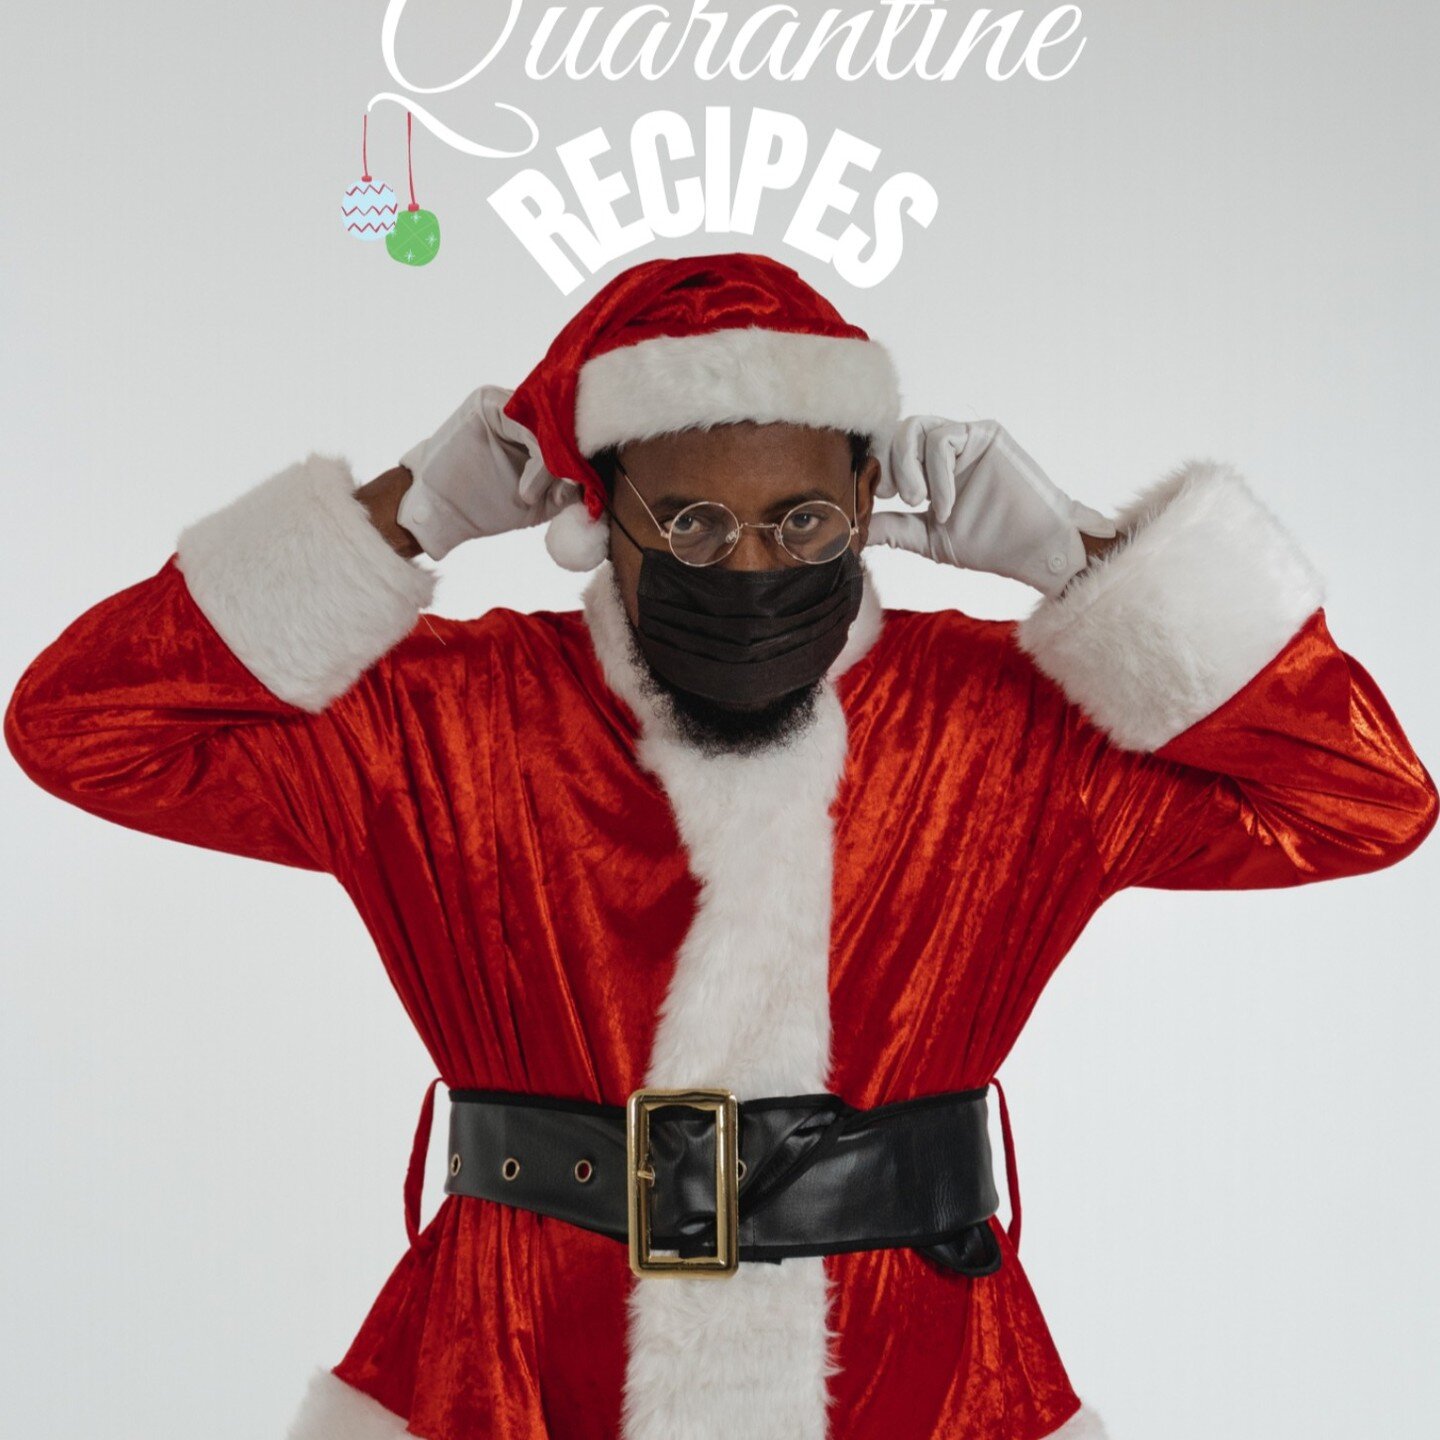 It's that time of year again when we are reminded of where it all started! Our community was born during the pandemic, and so were these Christmas Quarantine recipes. Download your free copy today at spiritandsoulcc.com and Sample our Soul! You can a